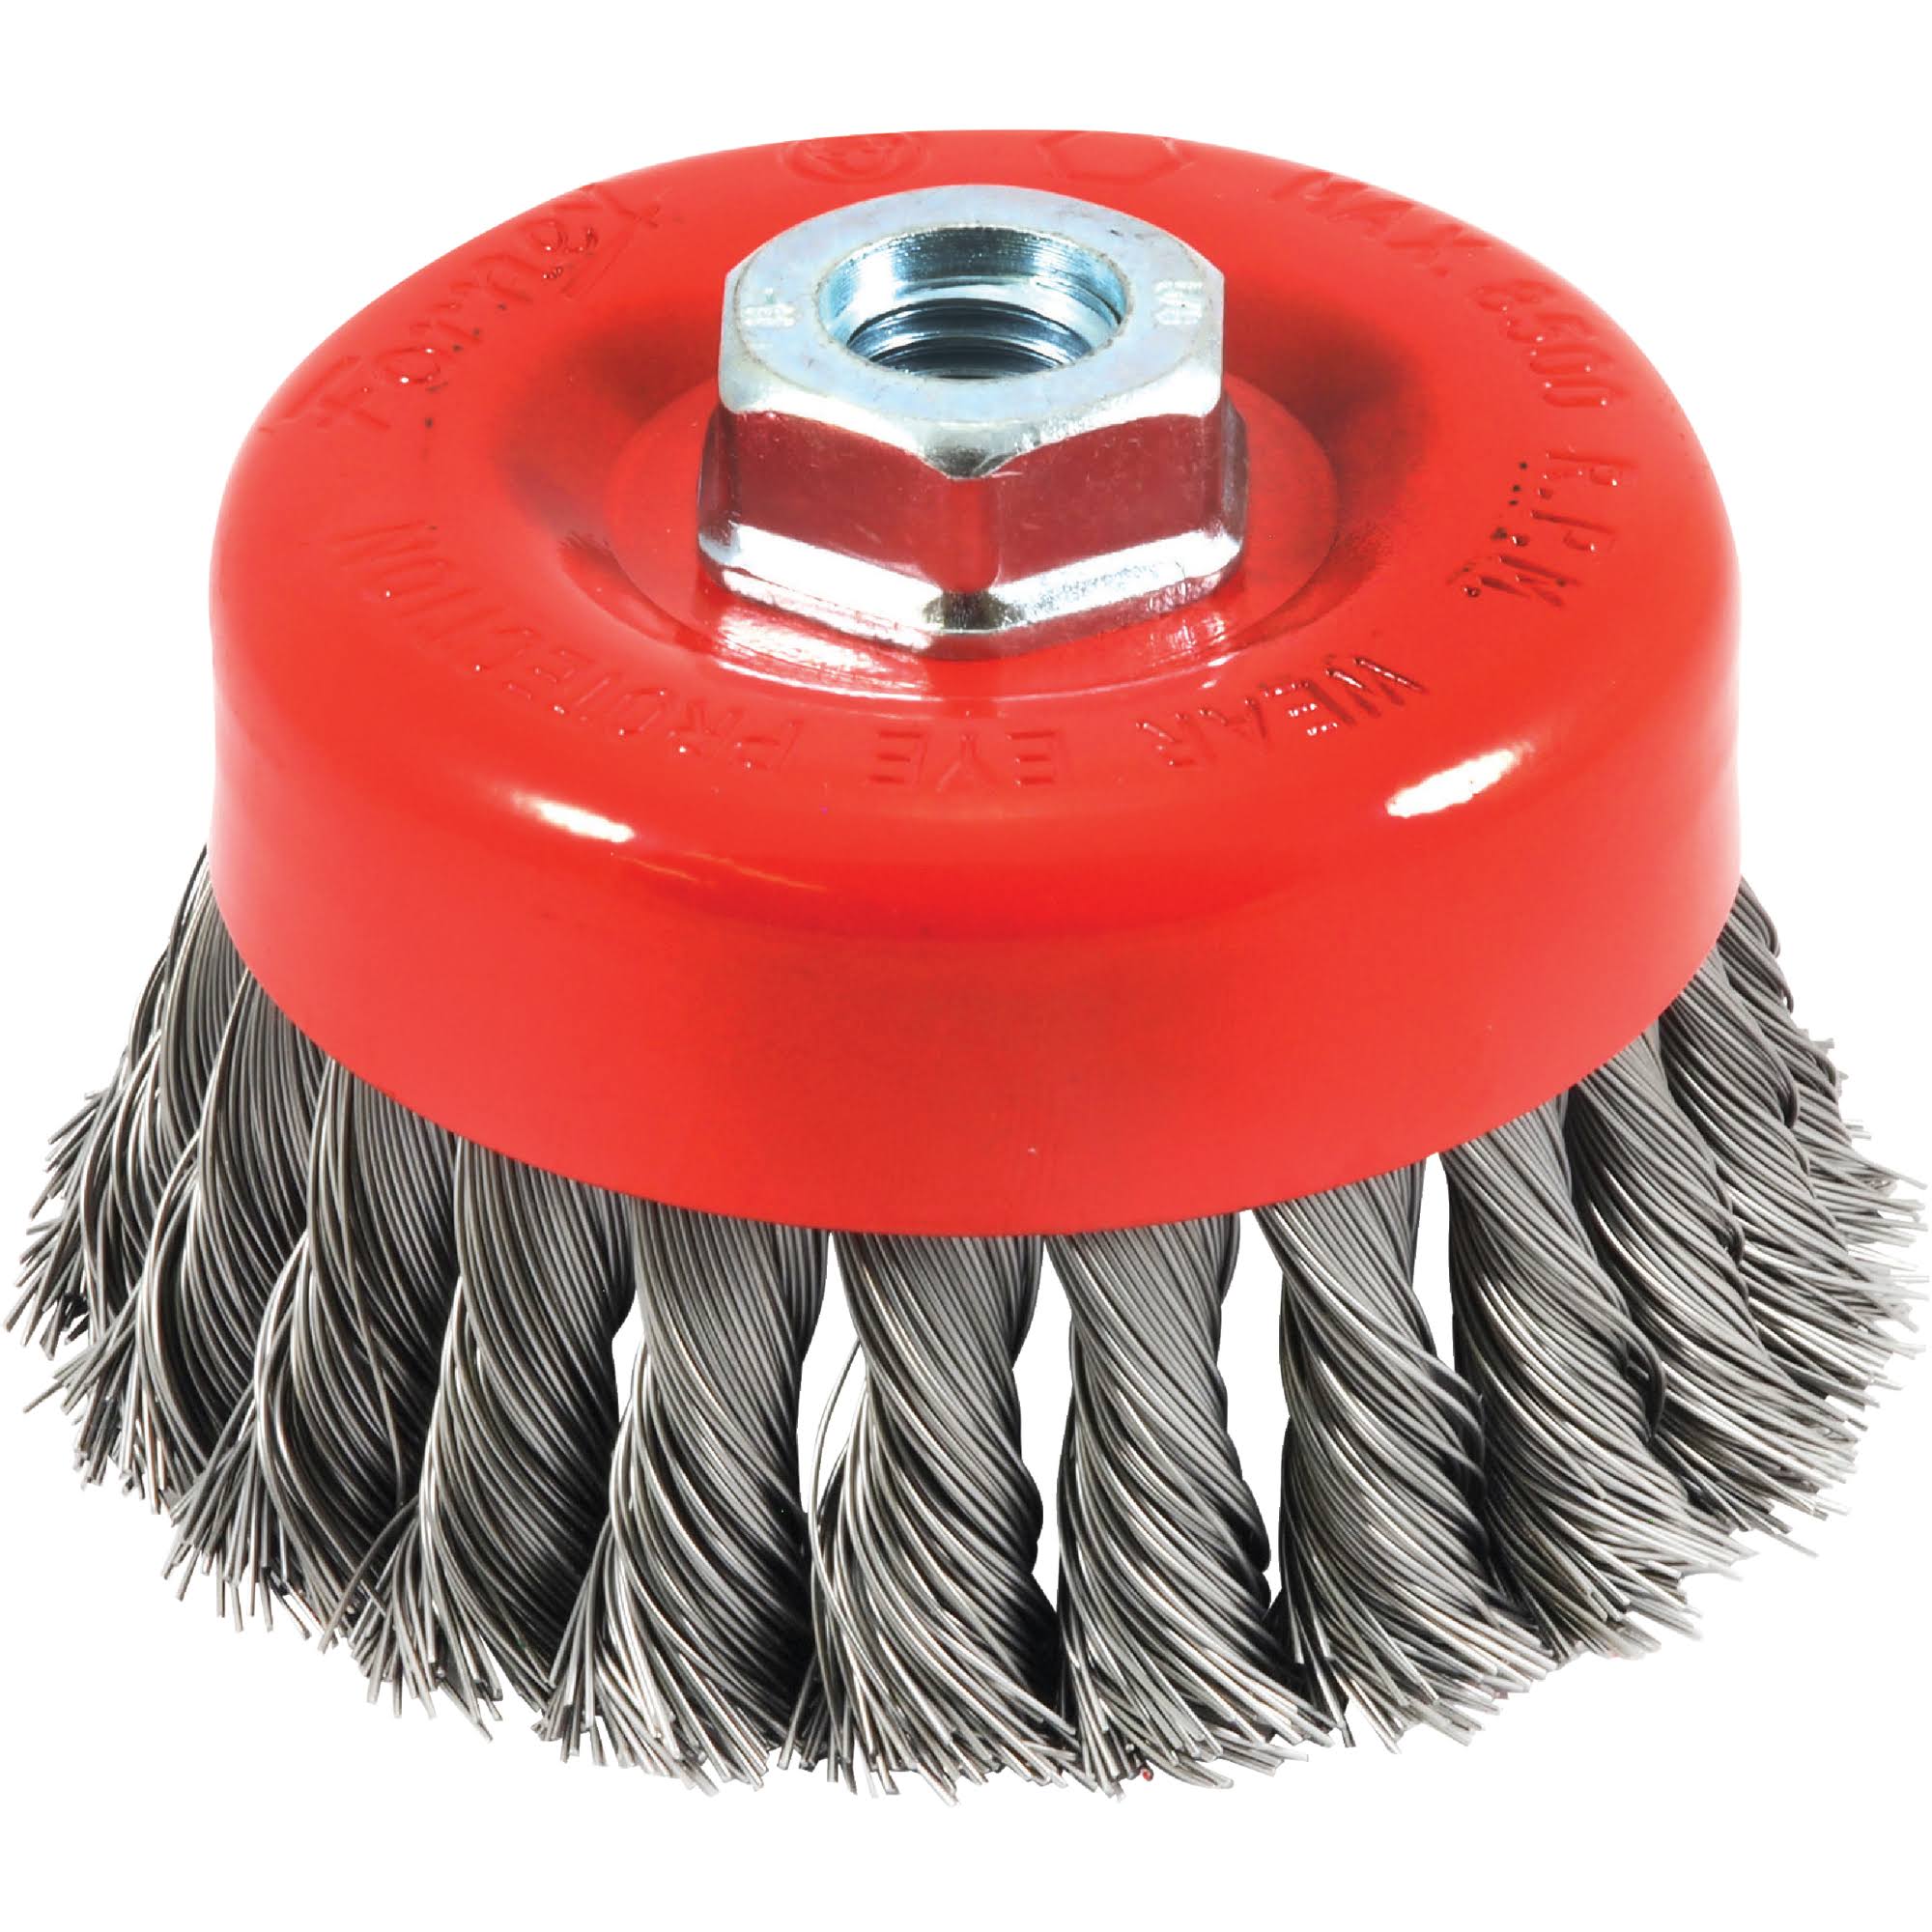 Forney Threaded Arbor Knotted Wire Cup Brush - 4"x5/8", 11 Thread